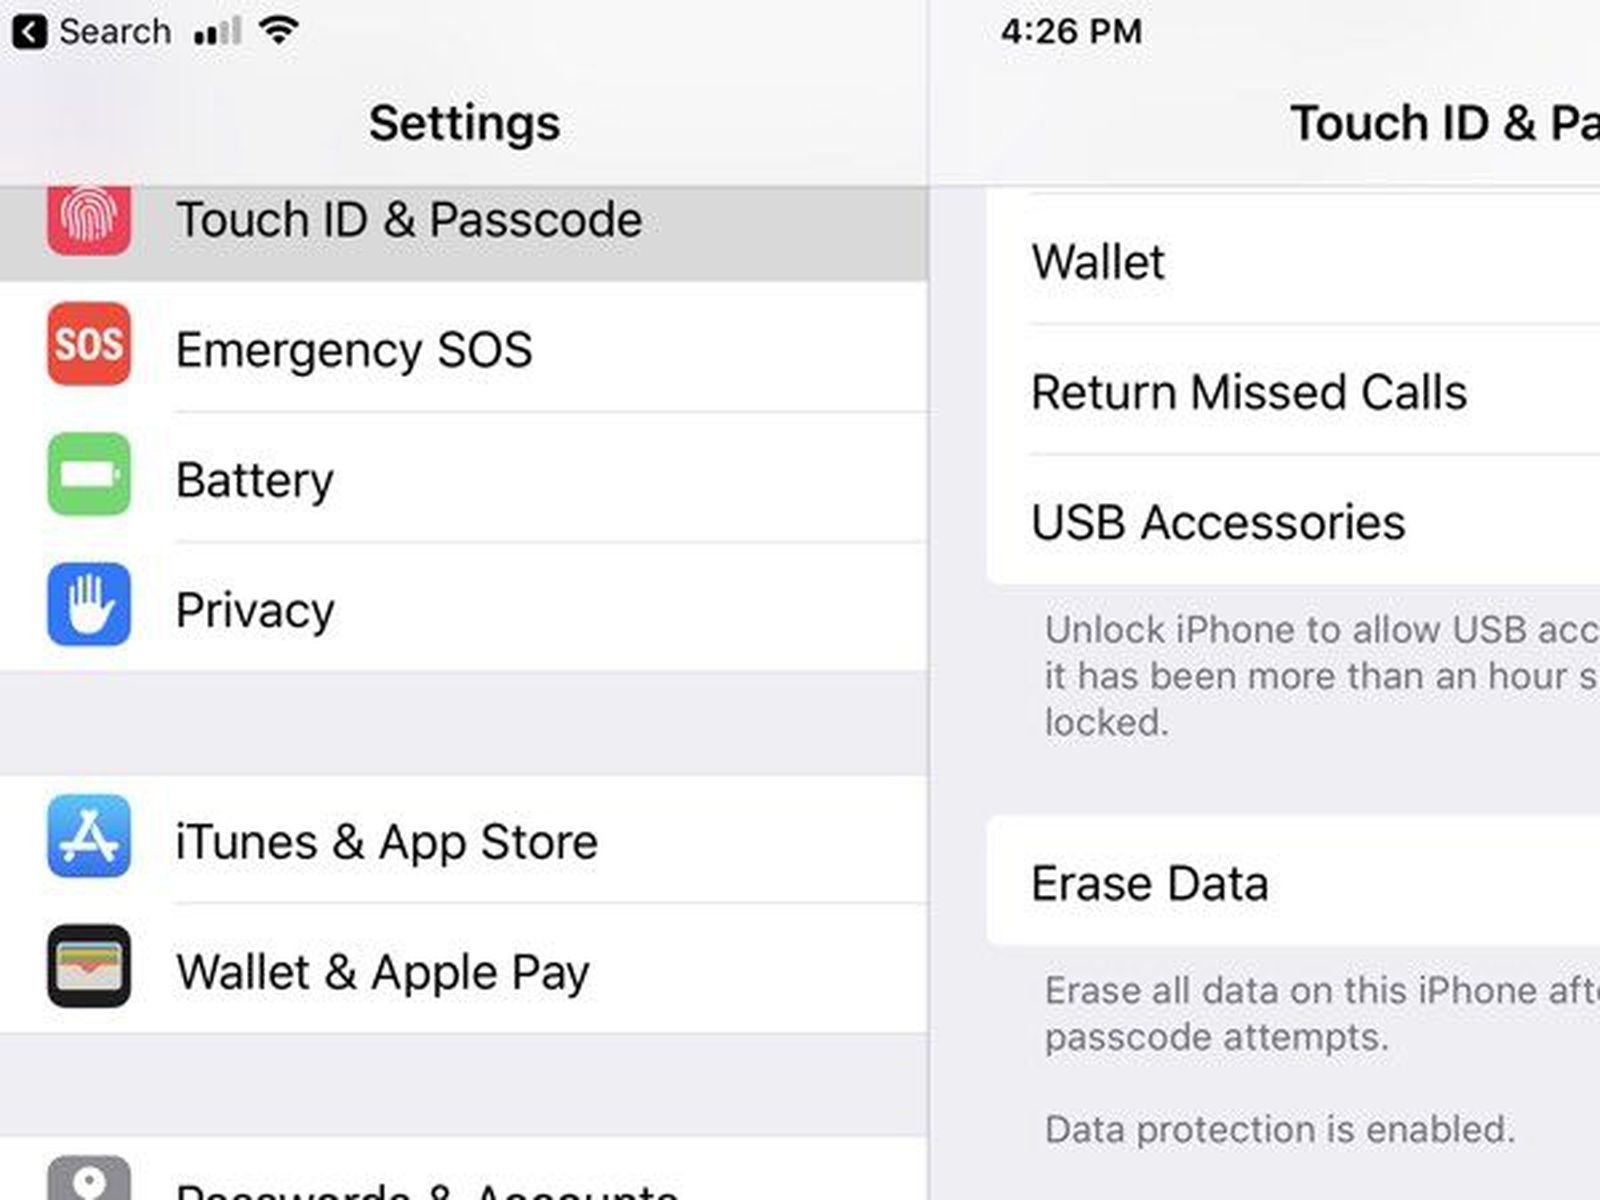 iOS 12 Includes Setting to Disable USB Access When an iPhone Hasn